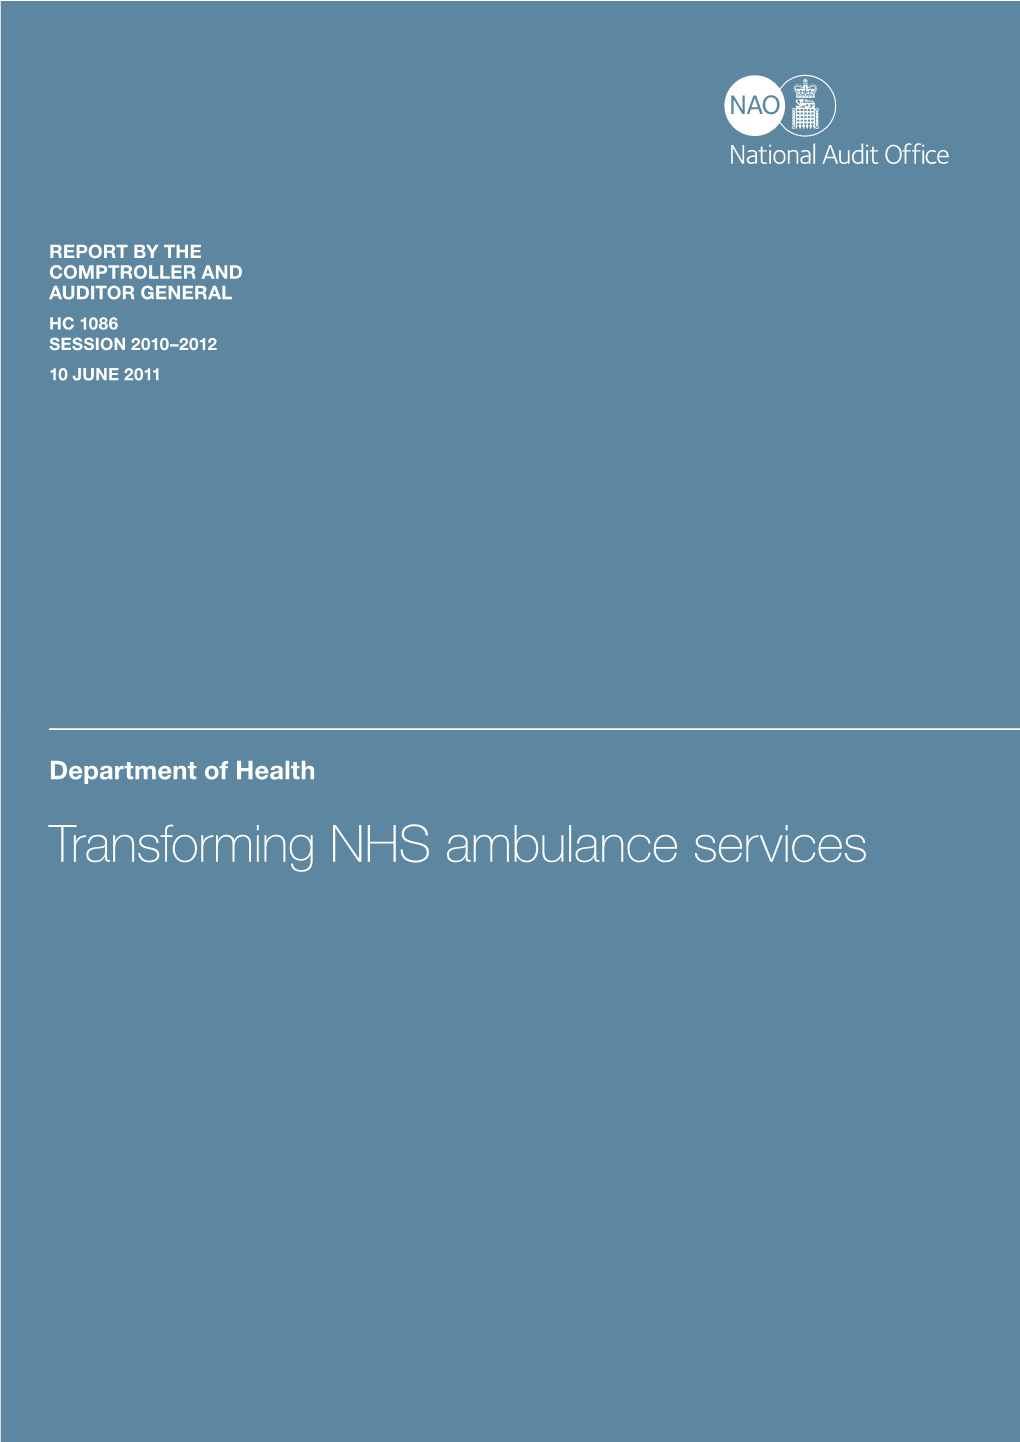 Transforming NHS Ambulance Services Our Vision Is to Help the Nation Spend Wisely